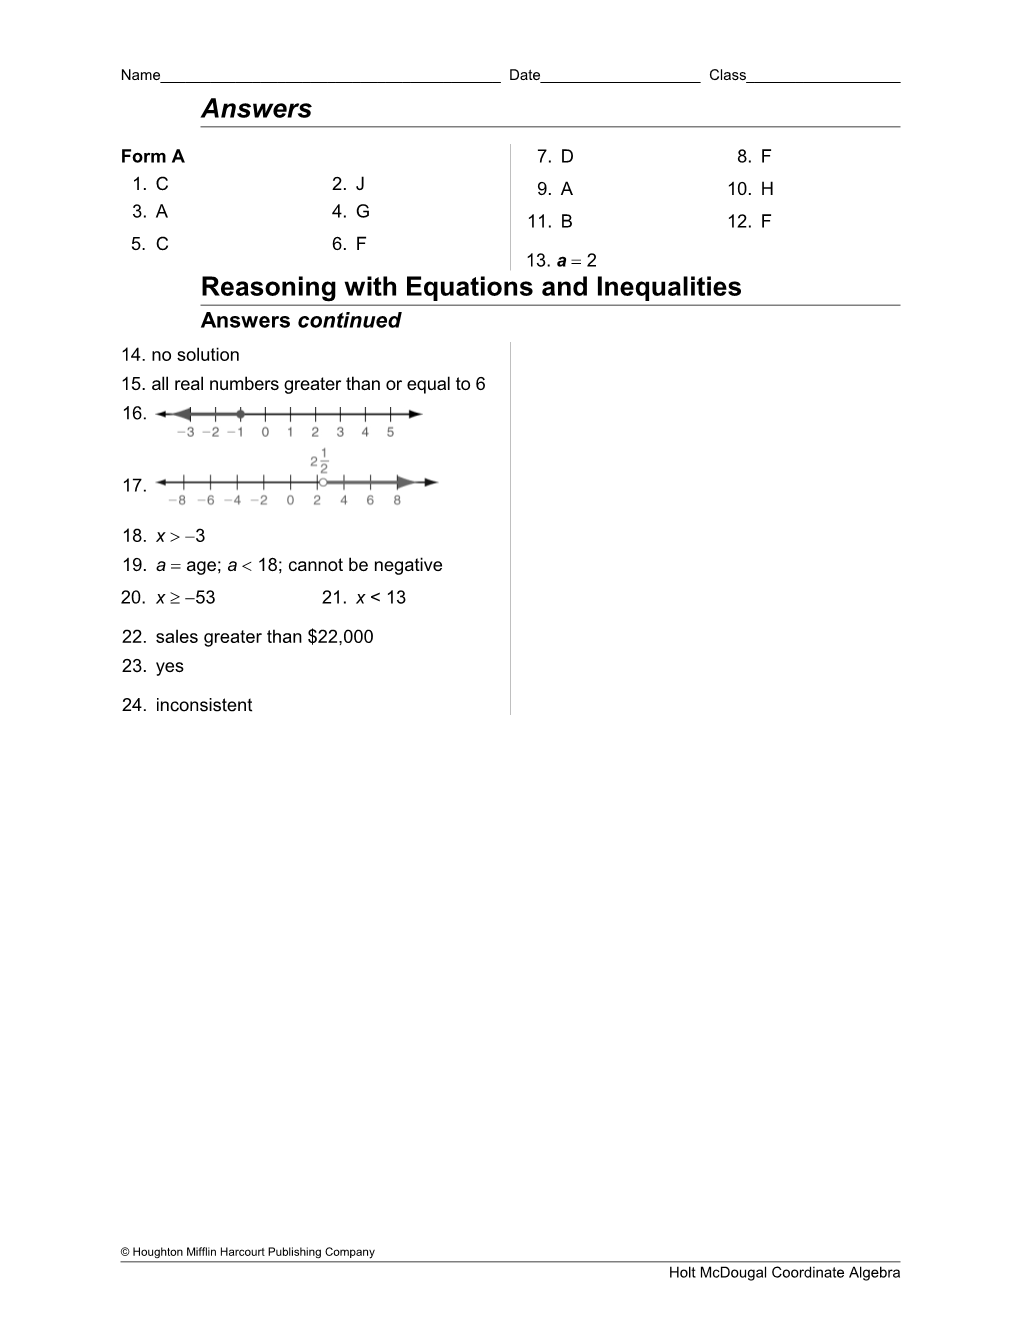 Reasoning with Equations and Inequalities